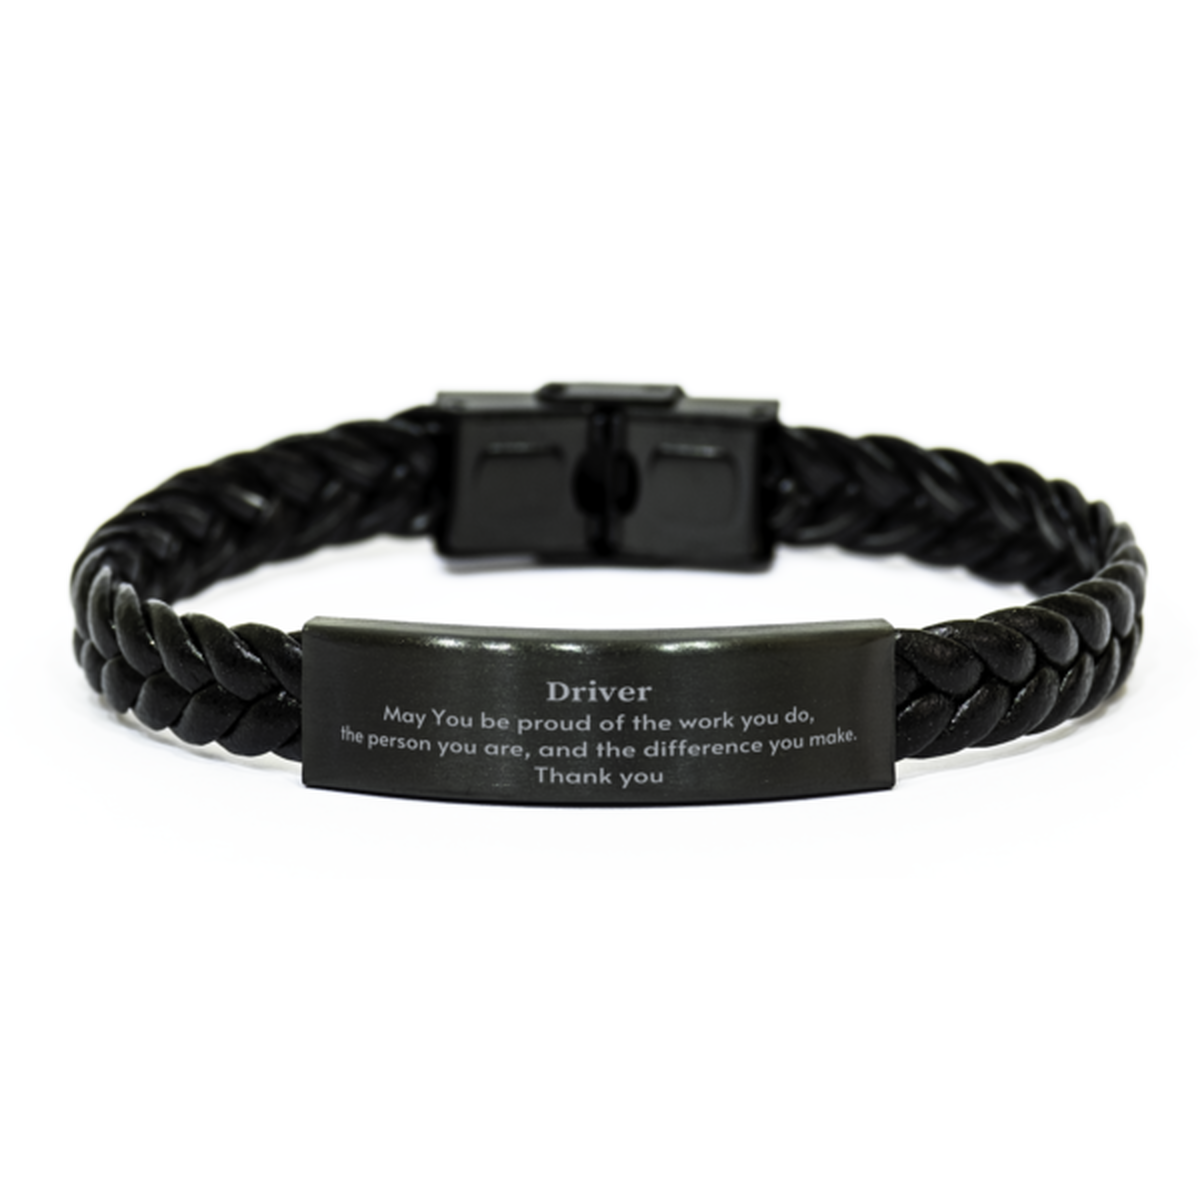 Heartwarming Braided Leather Bracelet Retirement Coworkers Gifts for Driver, Driver May You be proud of the work you do, the person you are Gifts for Boss Men Women Friends